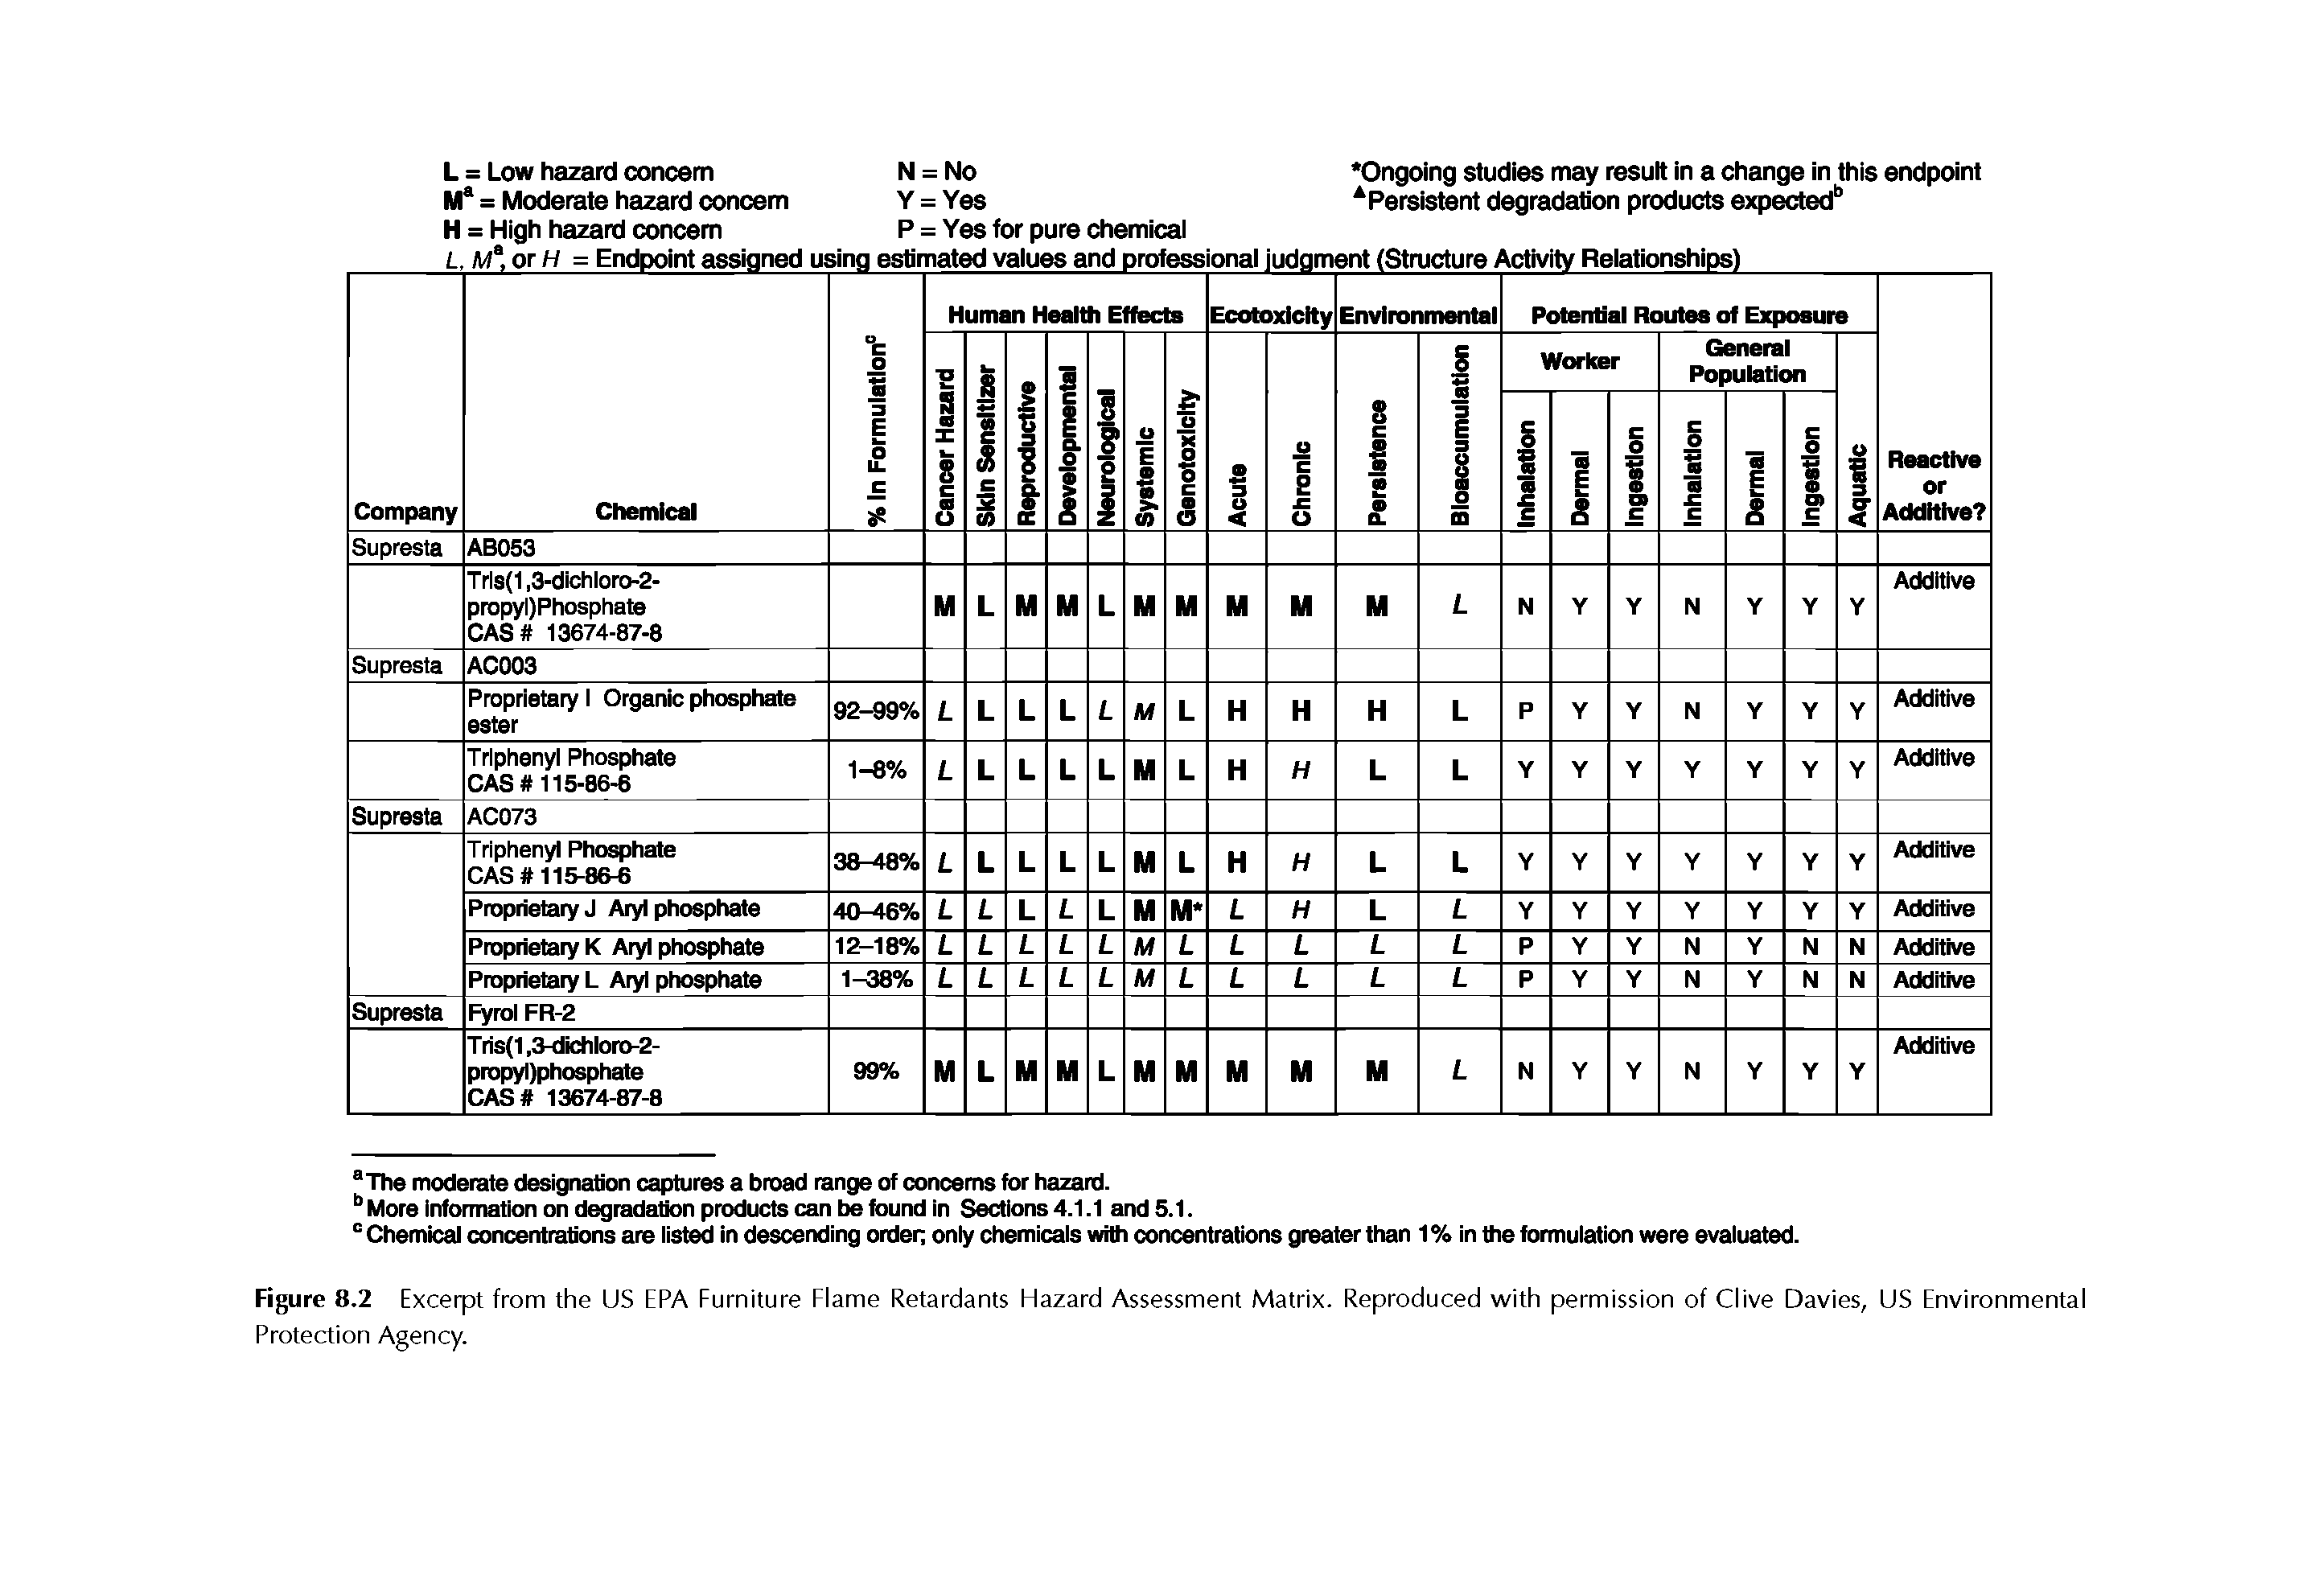 Figure 8.2 Excerpt from the US ERA Eurniture Flame Retardants Hazard Assessment Matrix. Reproduced with permission of Clive Davies, US Environmental Protection Agency.